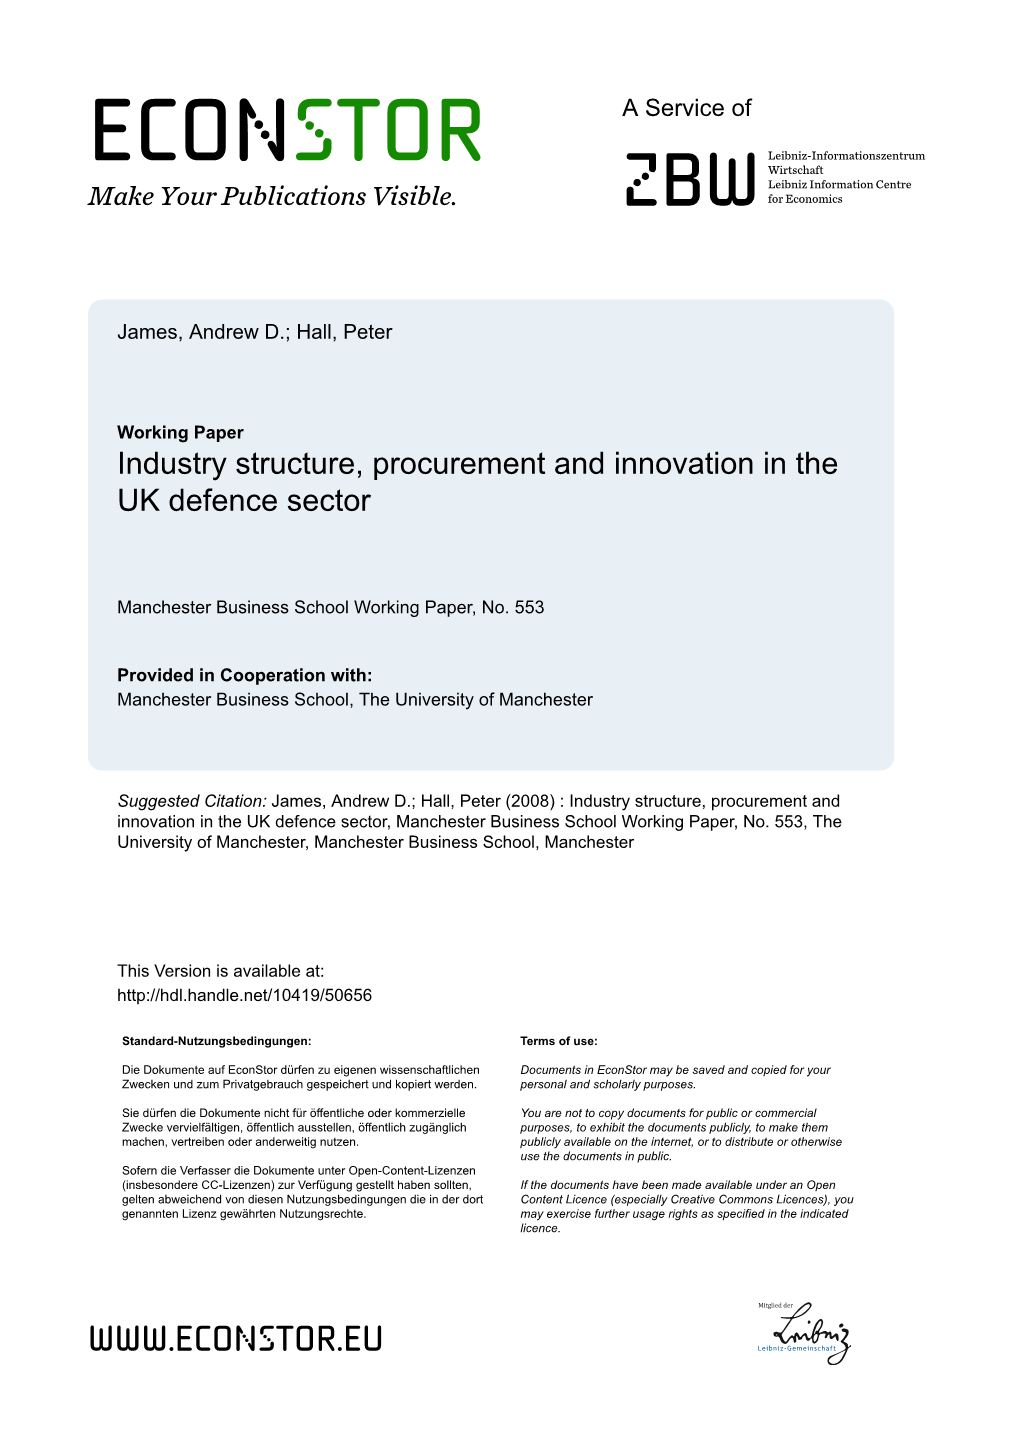 Industry Structure, Procurement and Innovation in the UK Defence Sector